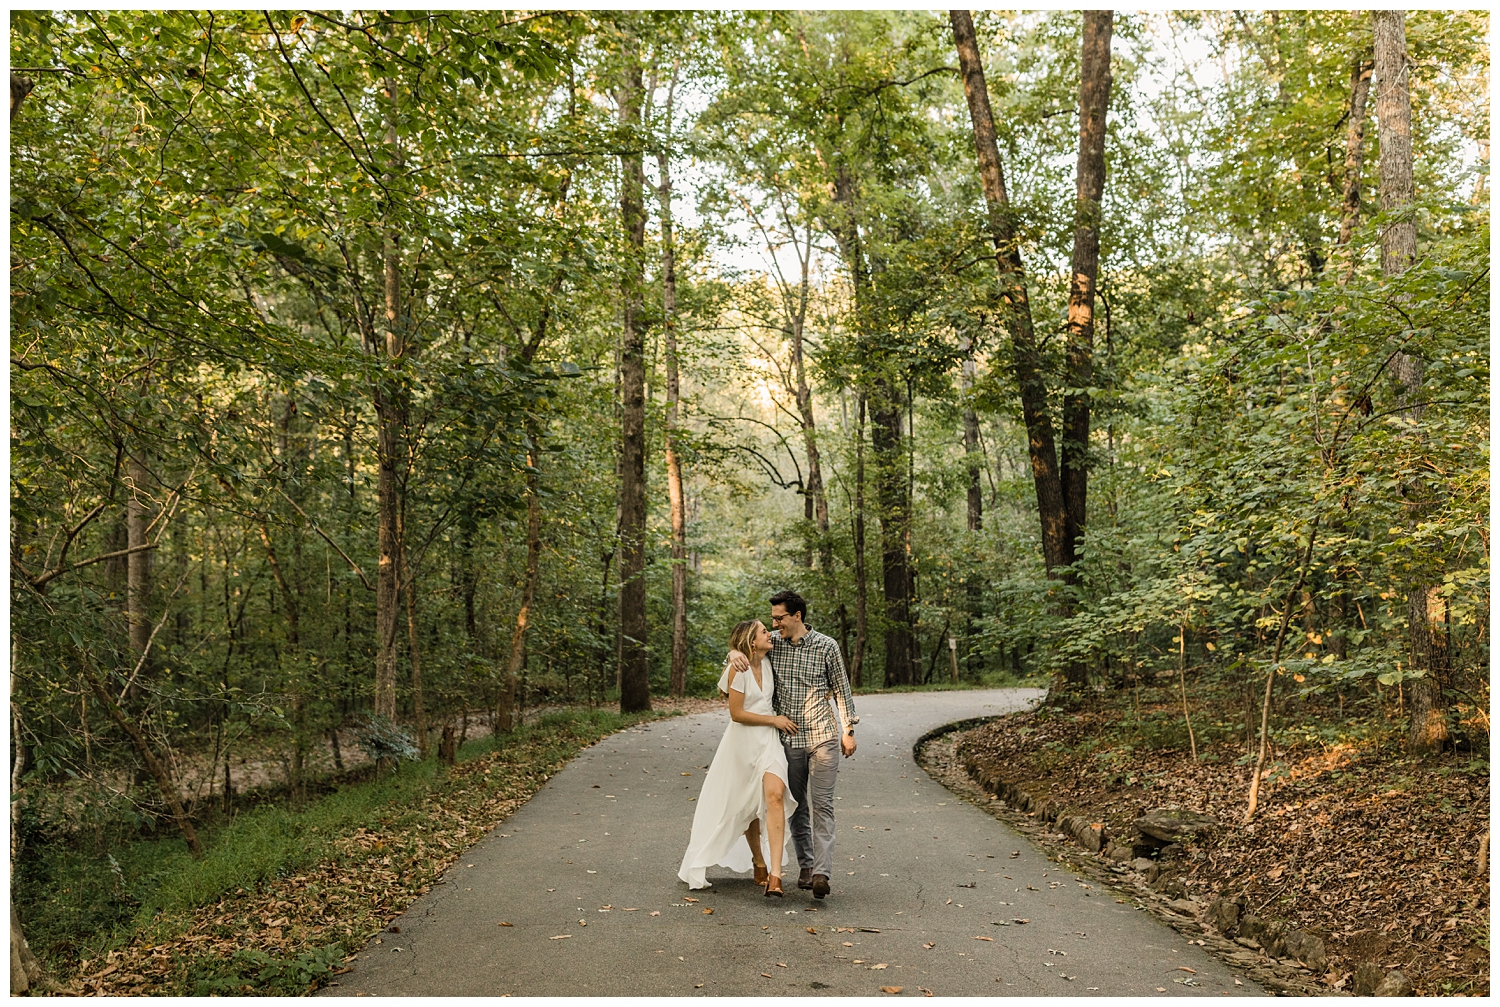 Young, engaged couple walking together on a trail in a forest in Atlanta, Georgia